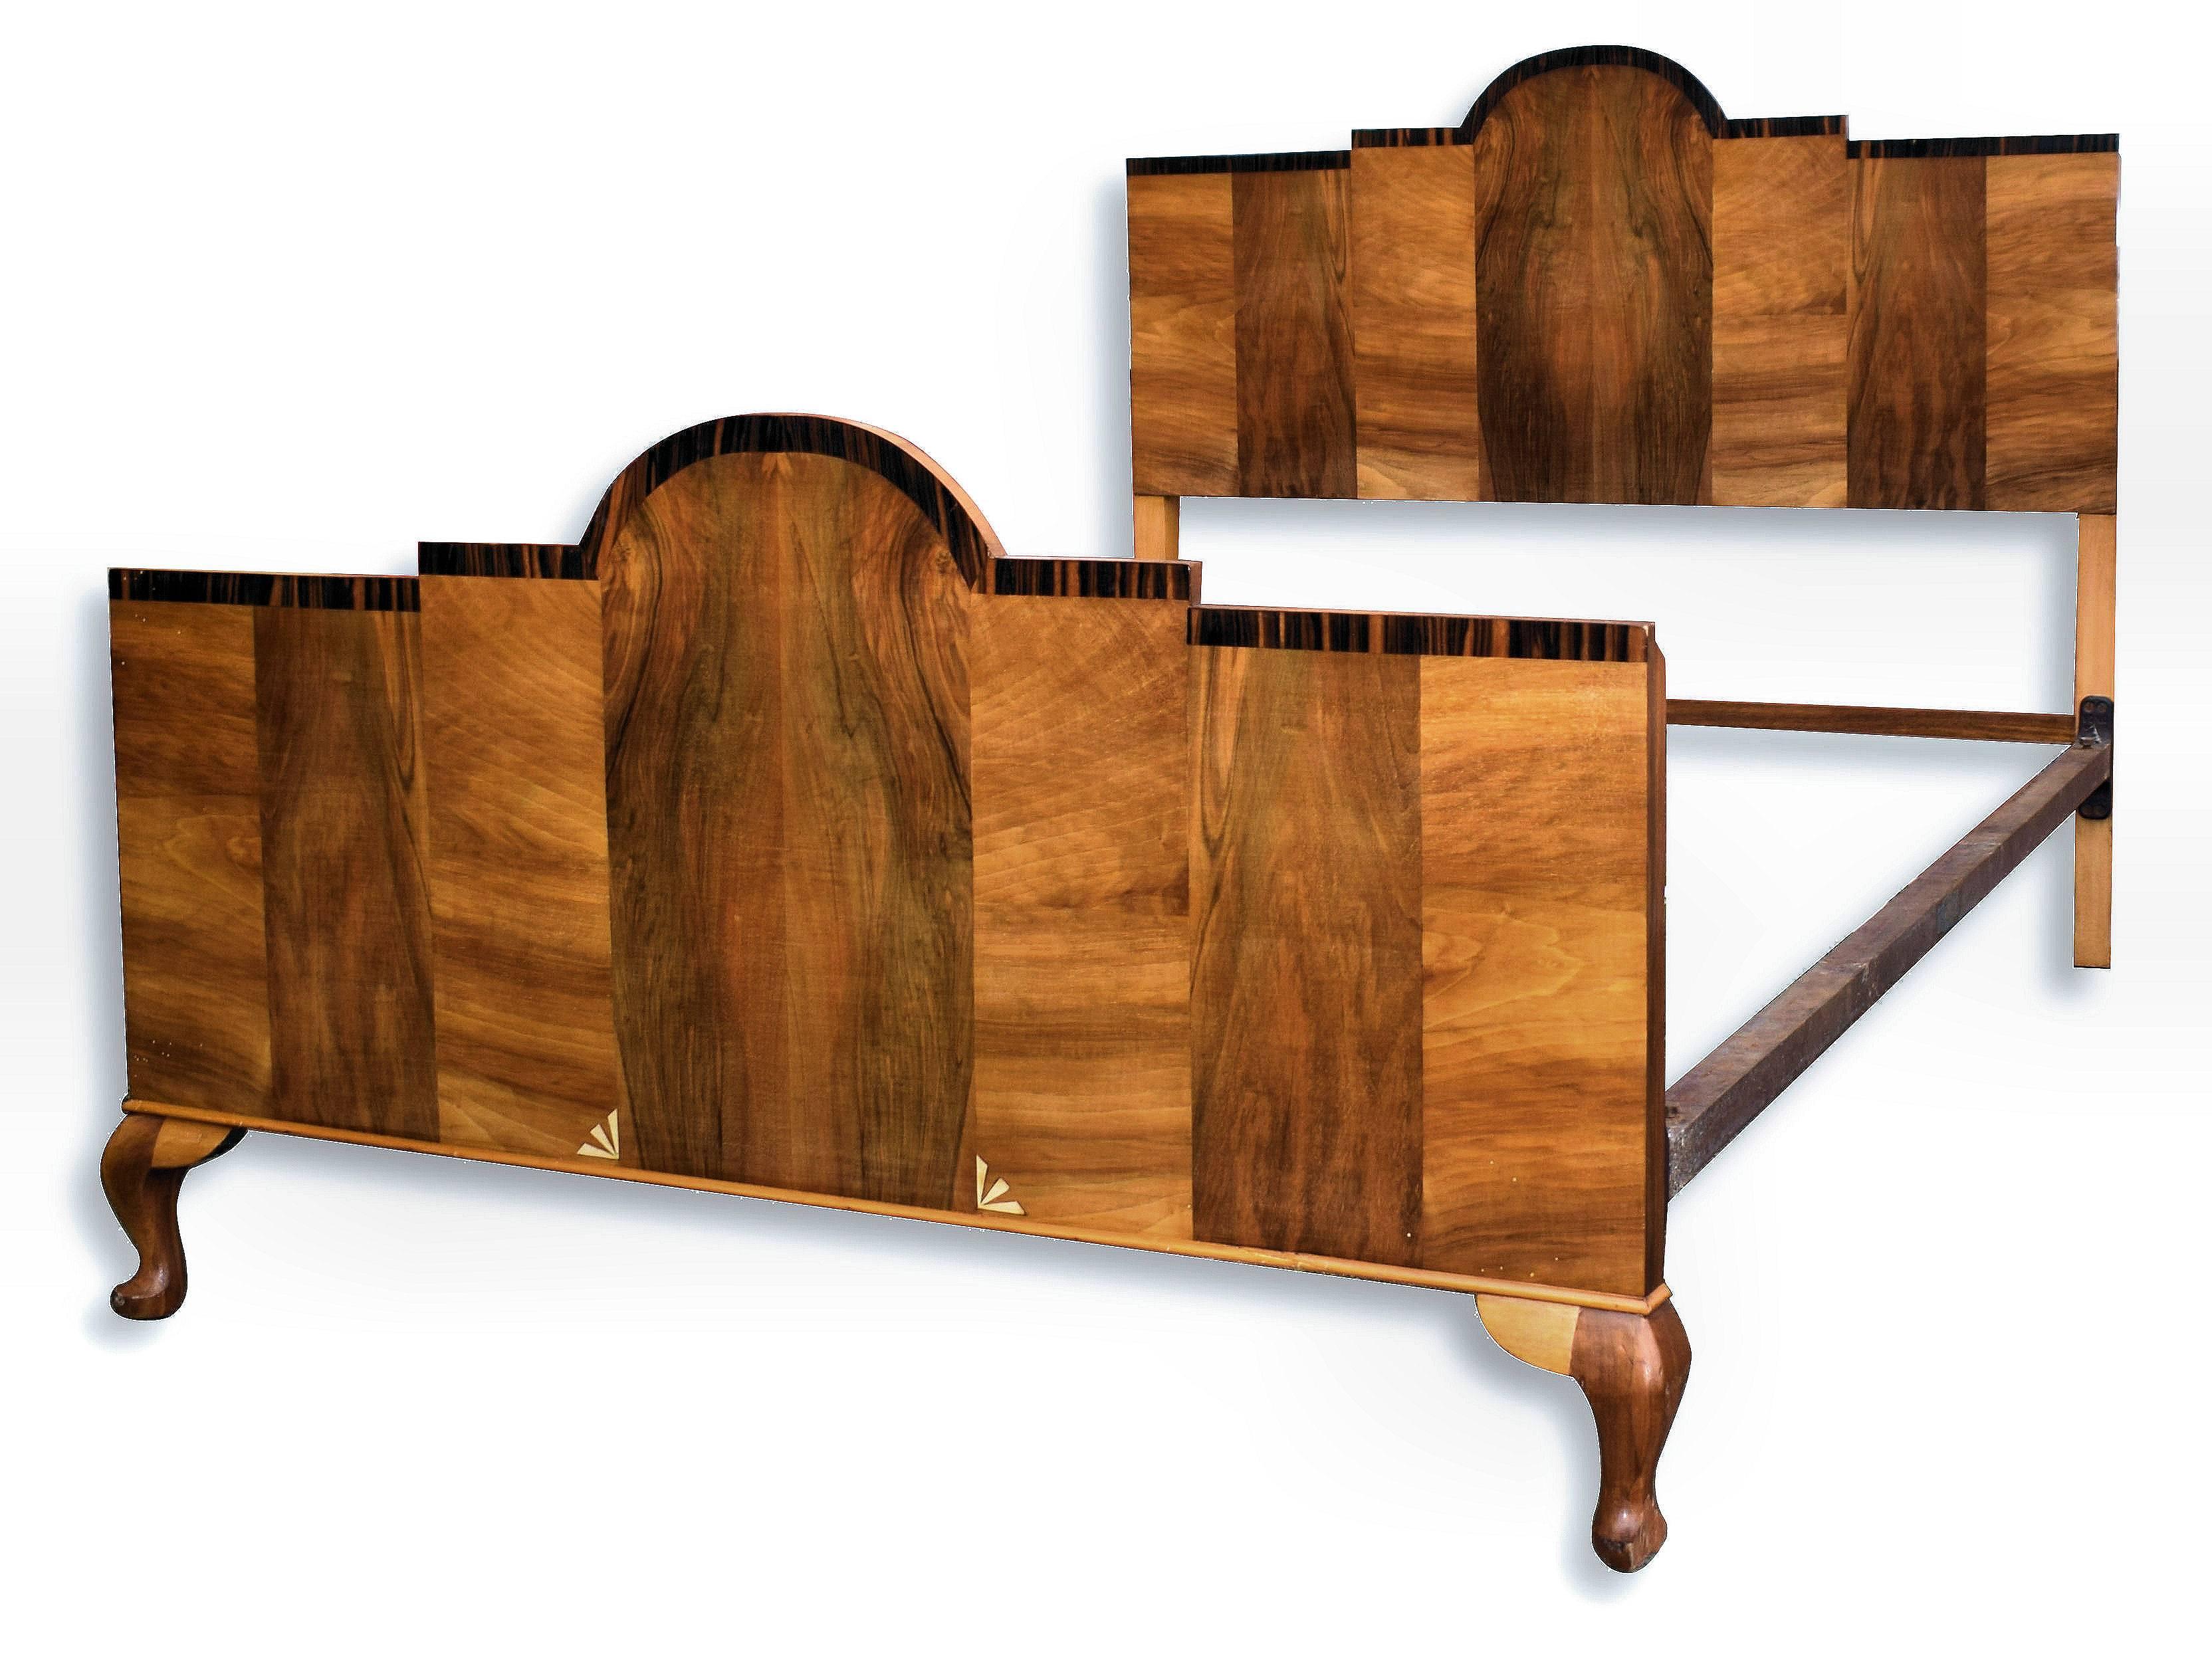 For your consideration is this fabulous and totally original 1930s Art Deco English double bed. The shape of the bed is very odeonesque and is accentuated by the outline border of Macassar veneers. The walnut veneered panels work beautifully and